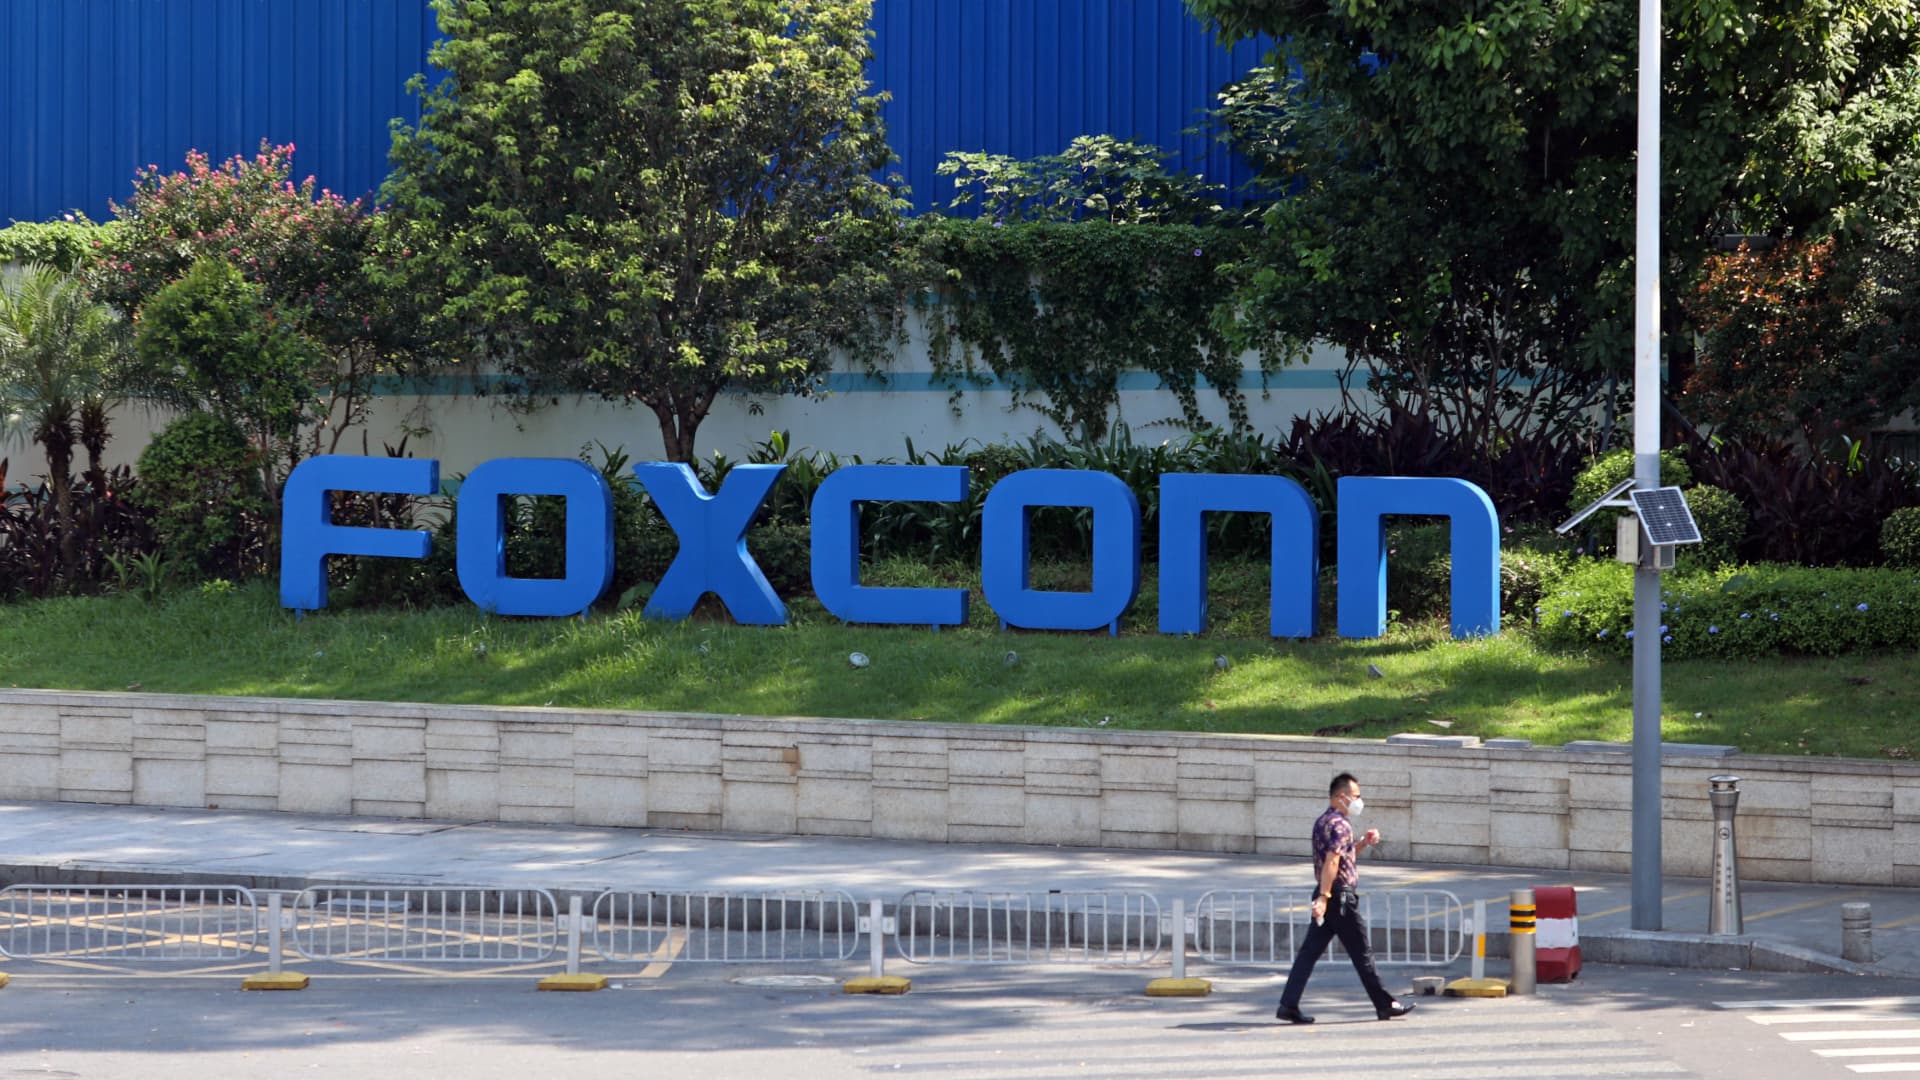 Apple supplier Foxconn helped persuade China to loosen Covid rules: report